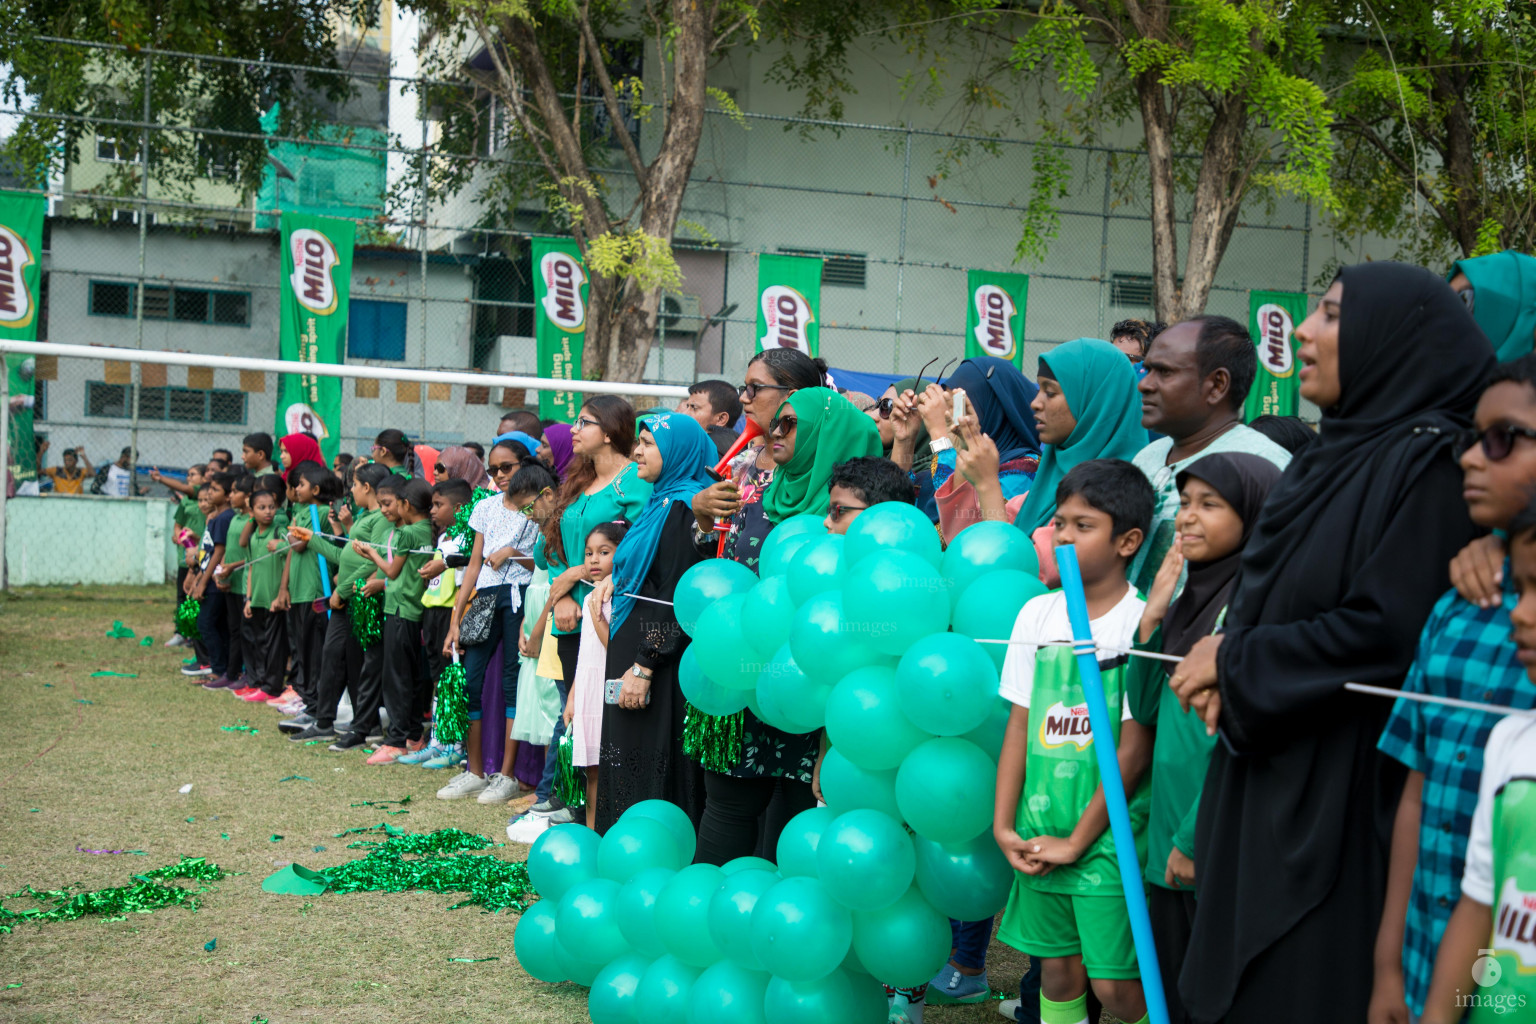 Finals and Closing ceremony of MILO Kids Football Fiesta 2019 in Henveiru Grounds in Male', Maldives, Saturday, February 23rd 2019 (Images.mv Photo/Suadh Abdul Sattar, Ismail Thoriq)